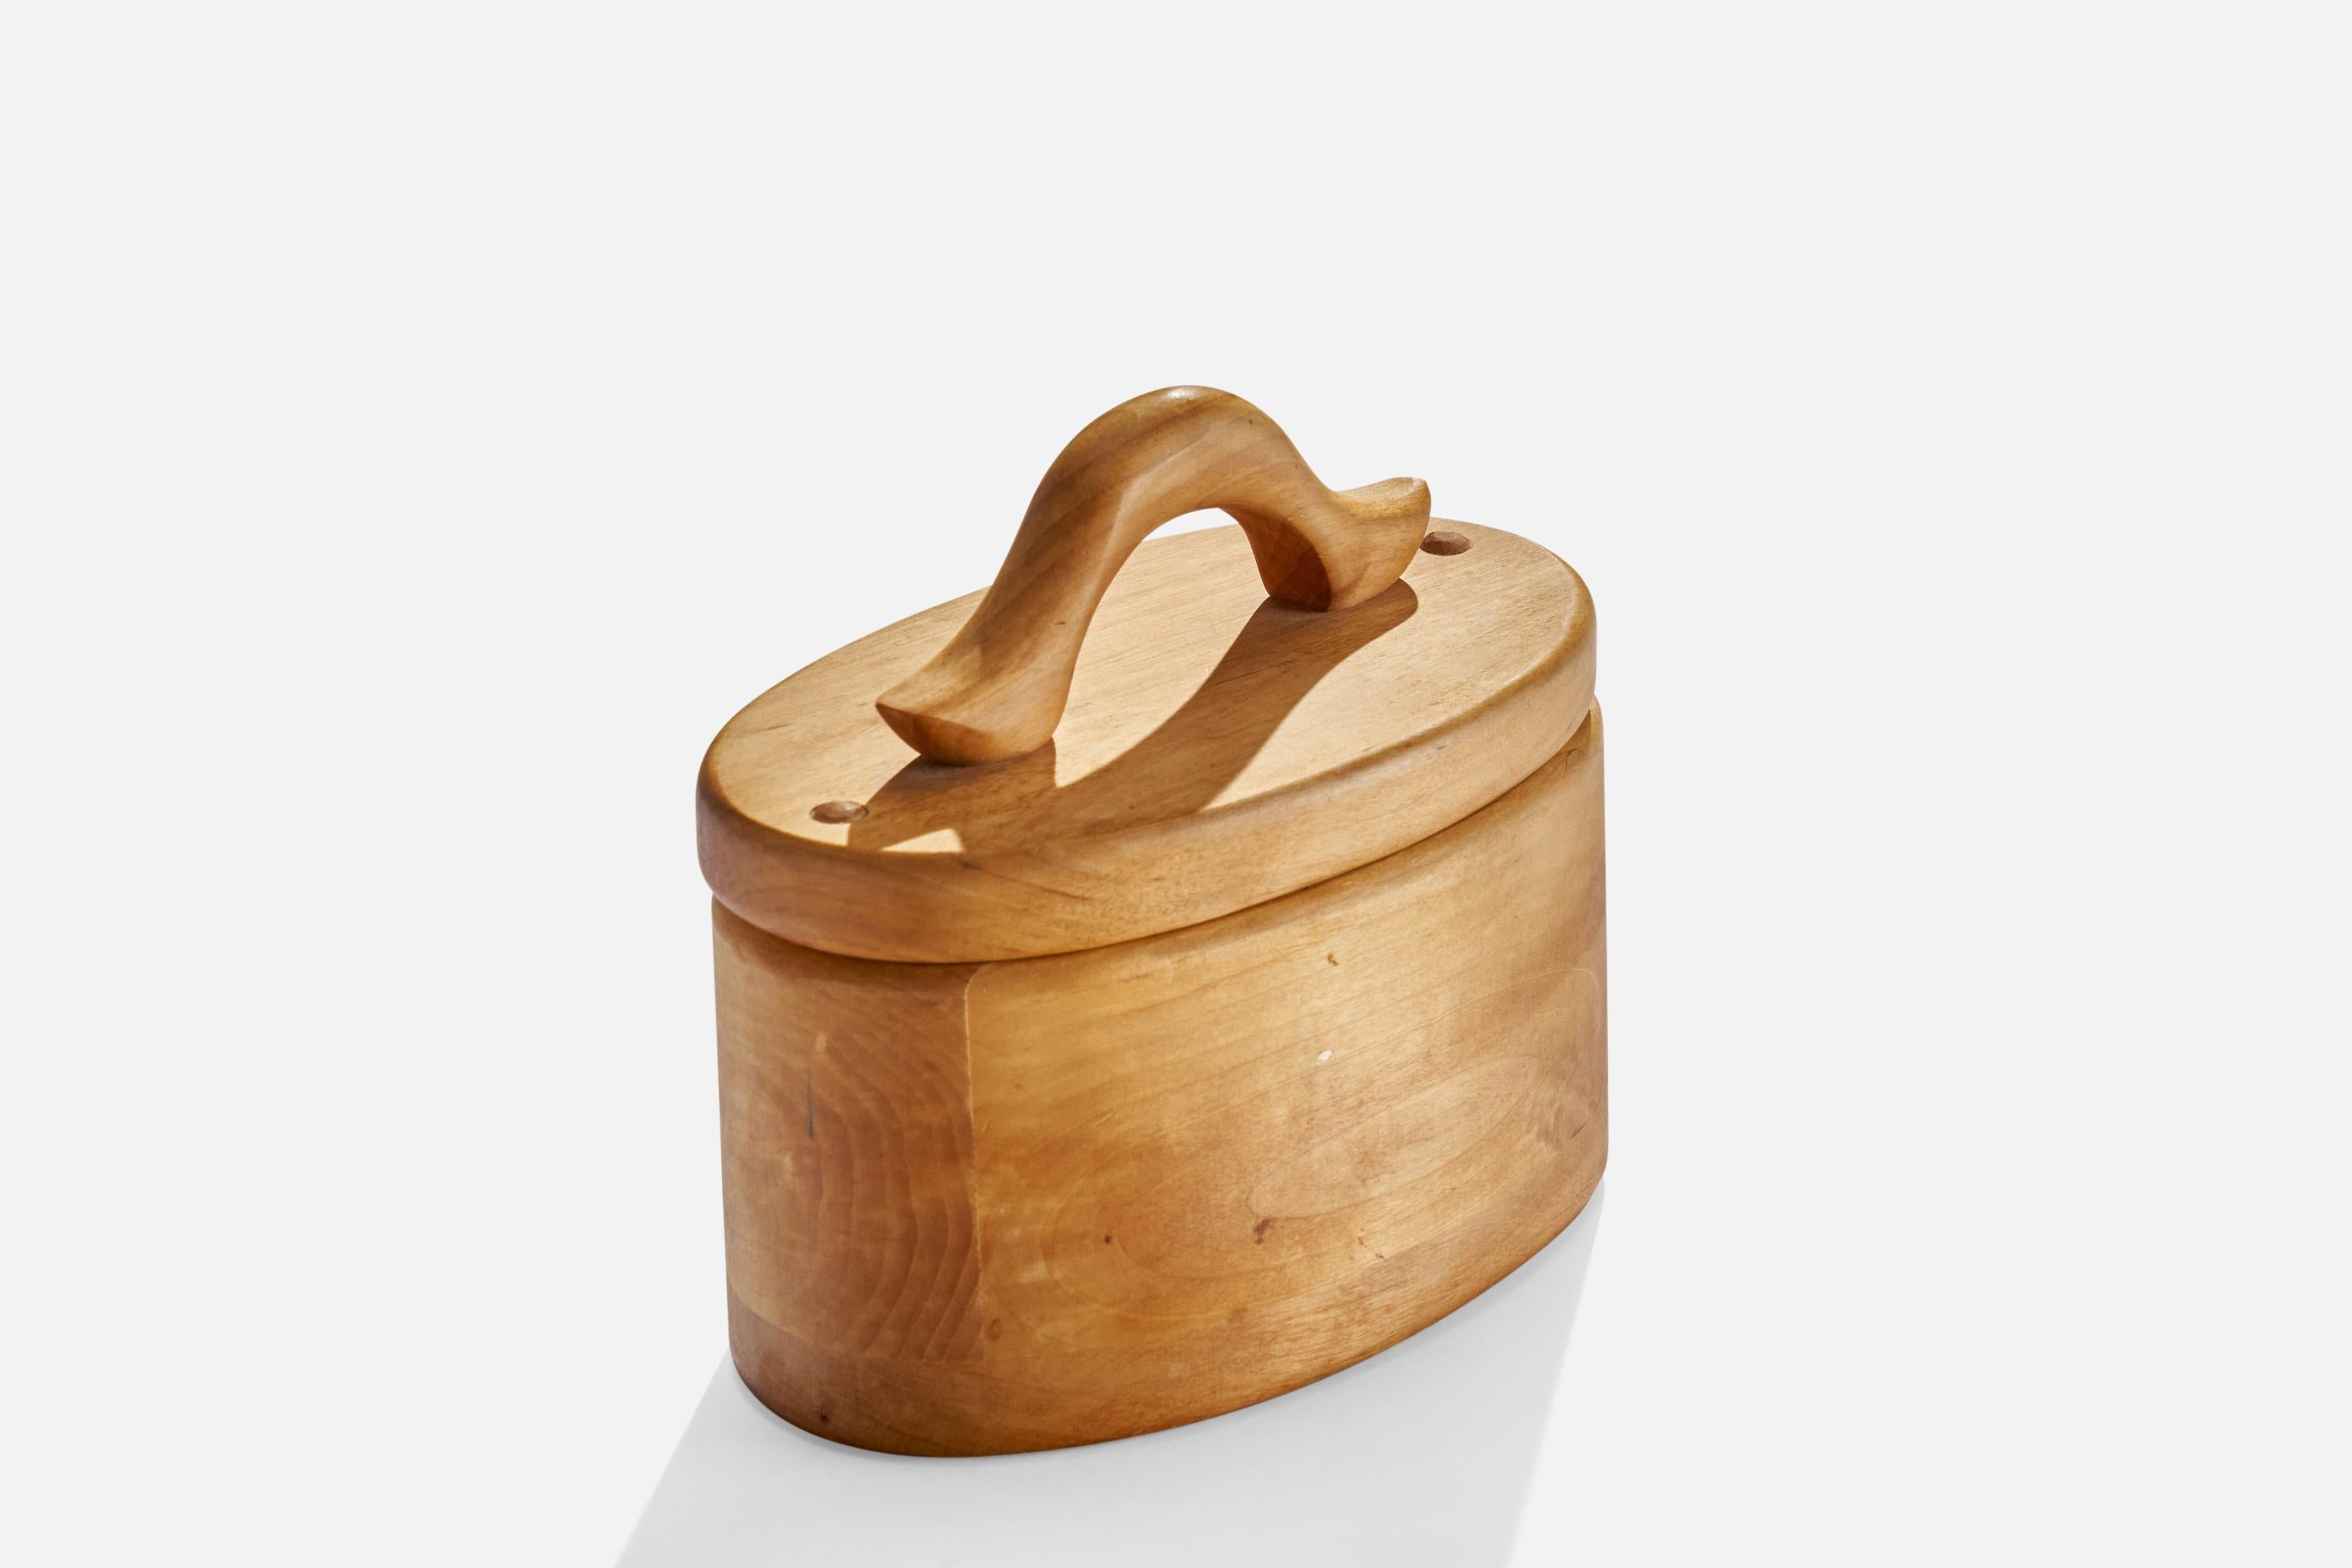 A handcrafted wooden lidded box designed and produced by Bänsteboa Slöjdcenter, Sweden, c. 1970s